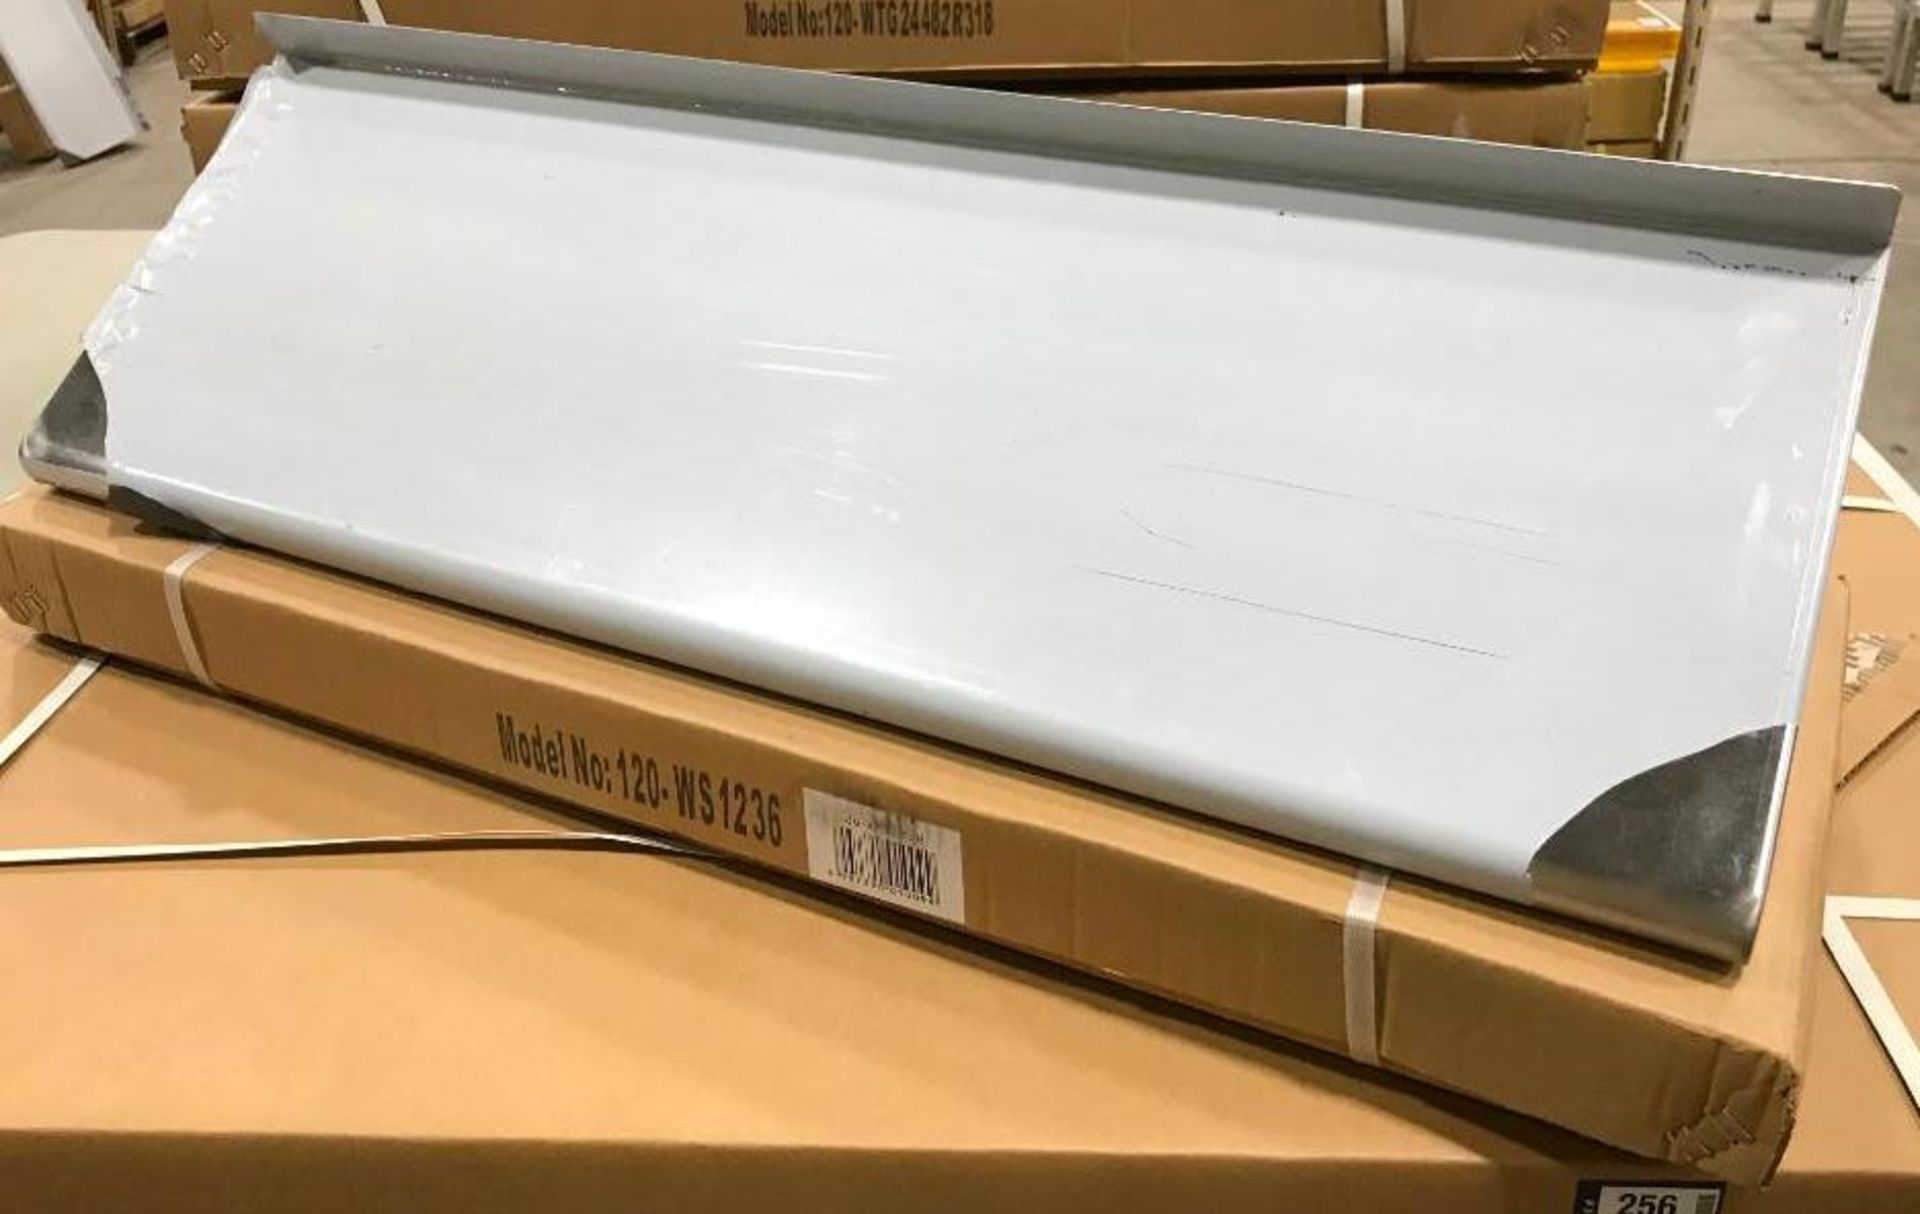 WALL MOUNT S/S SHELF 12"X36", 120 -WS1236 - NEW IN BOX - Image 2 of 5